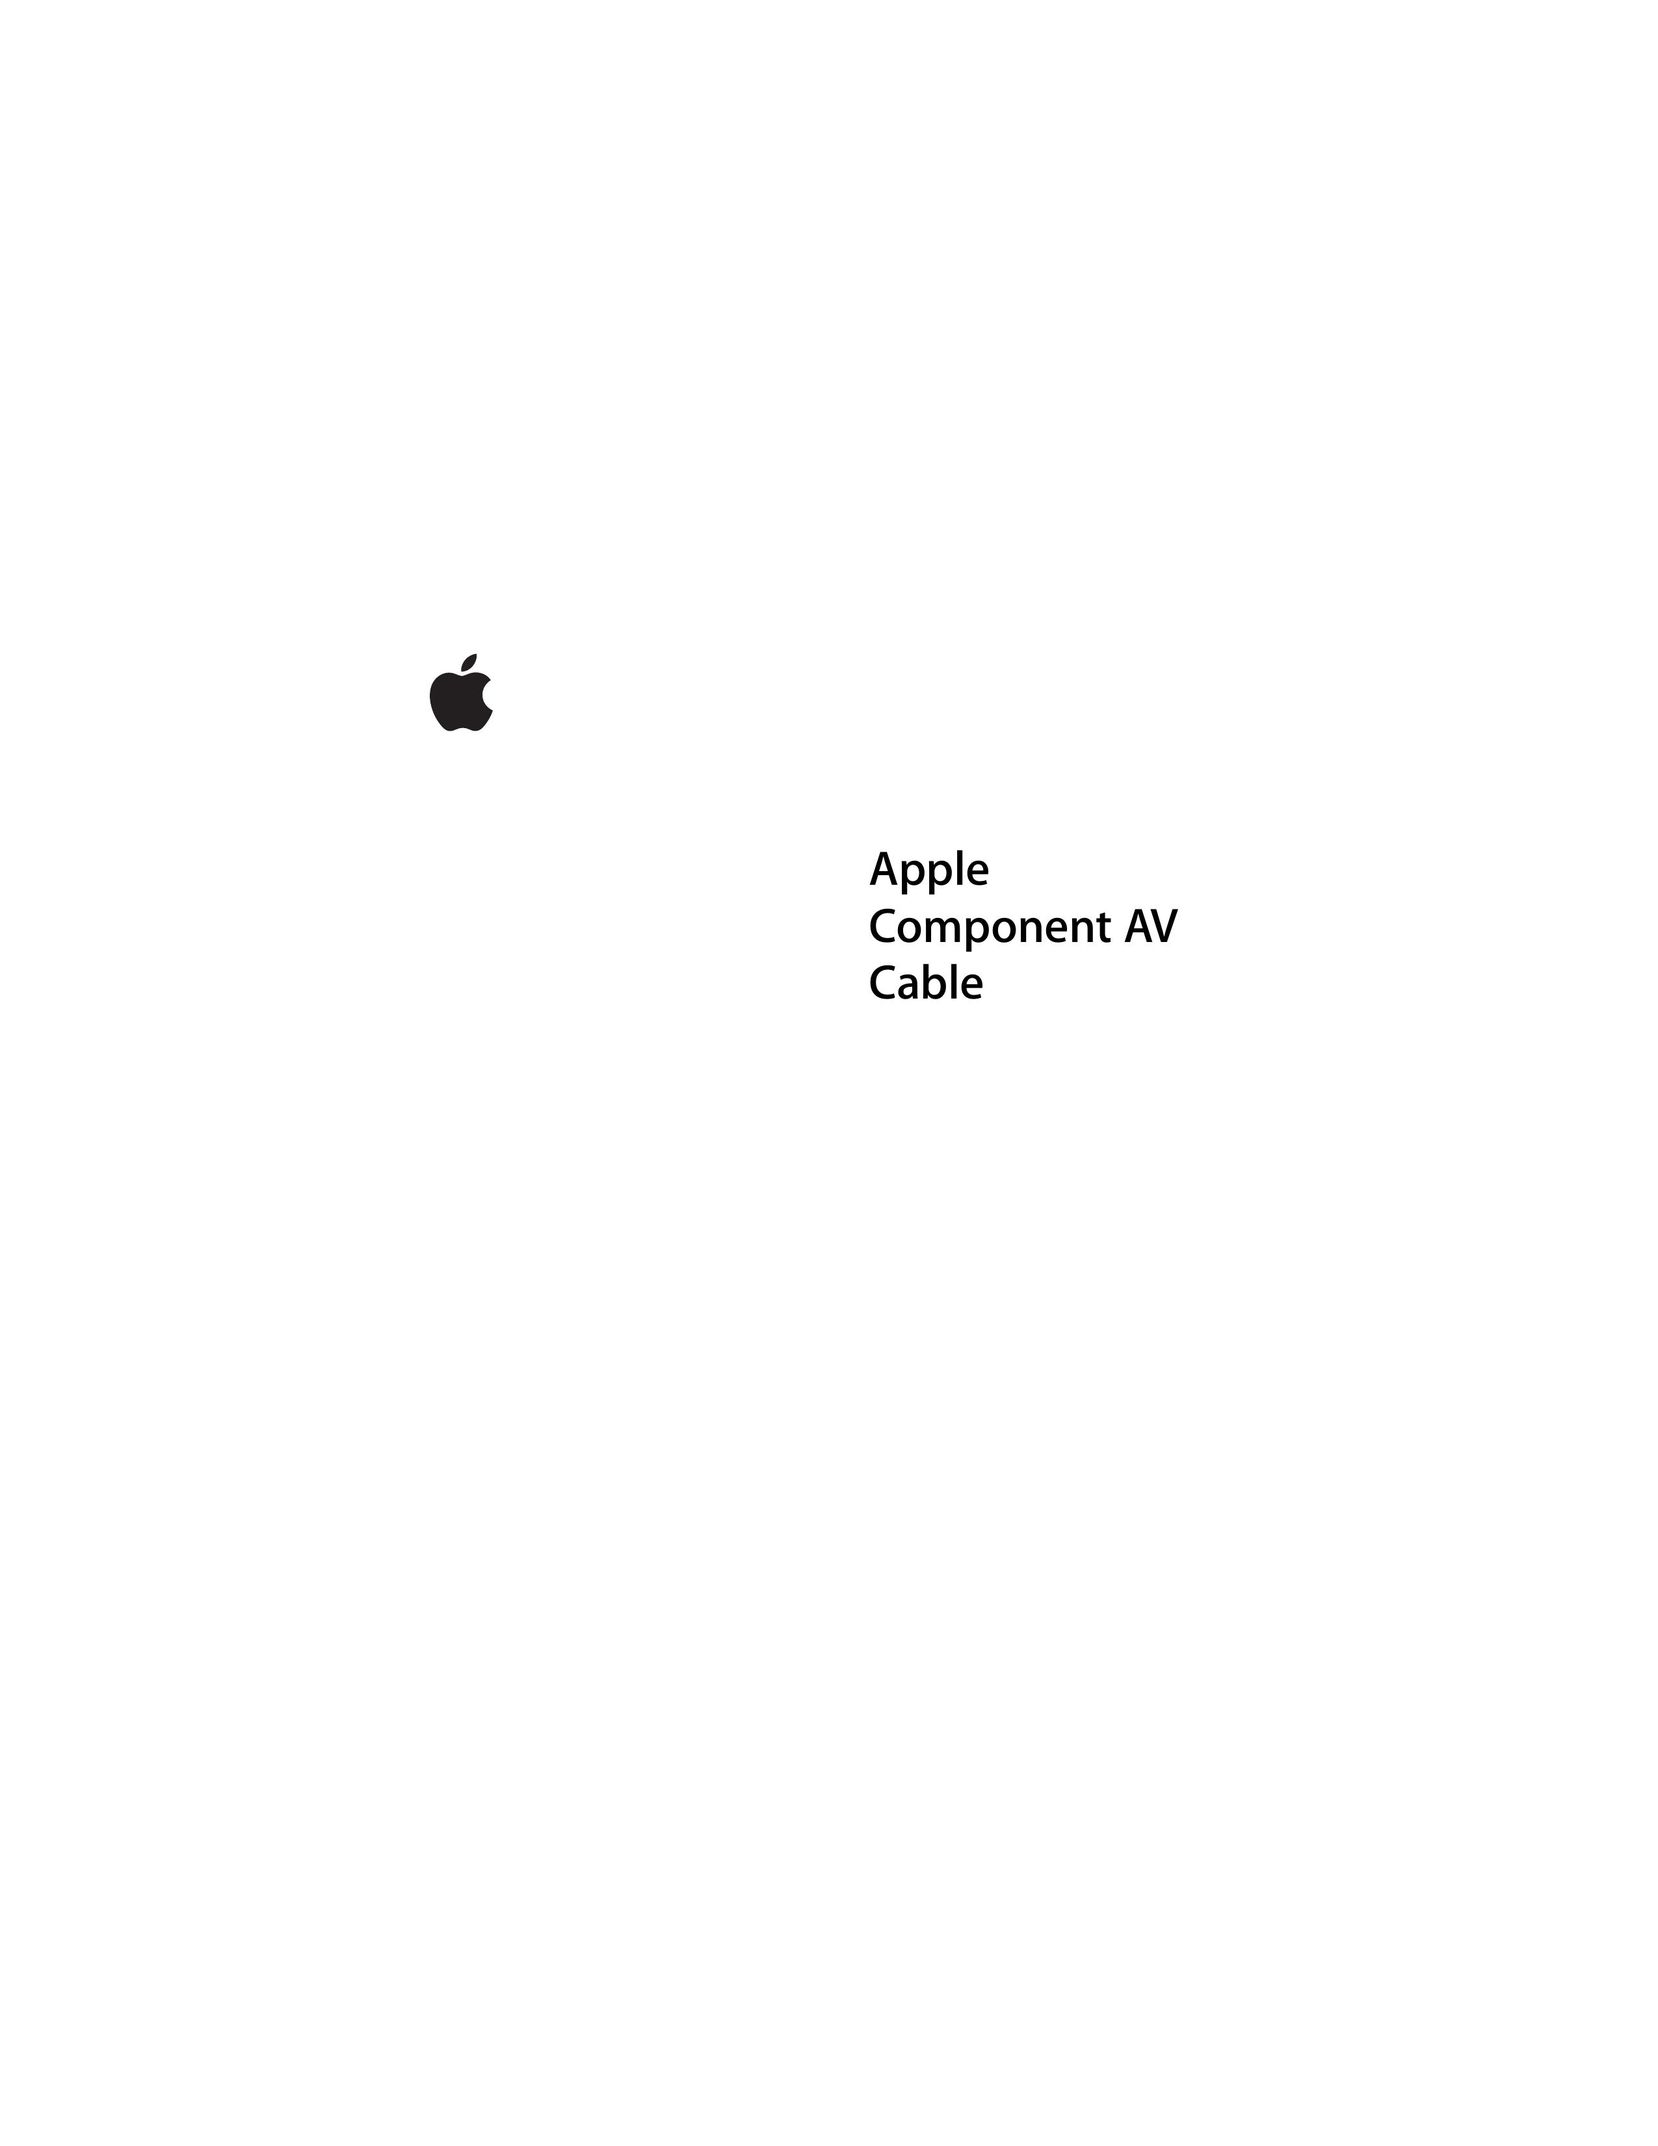 Apple Component AV Cable Computer Accessories User Manual